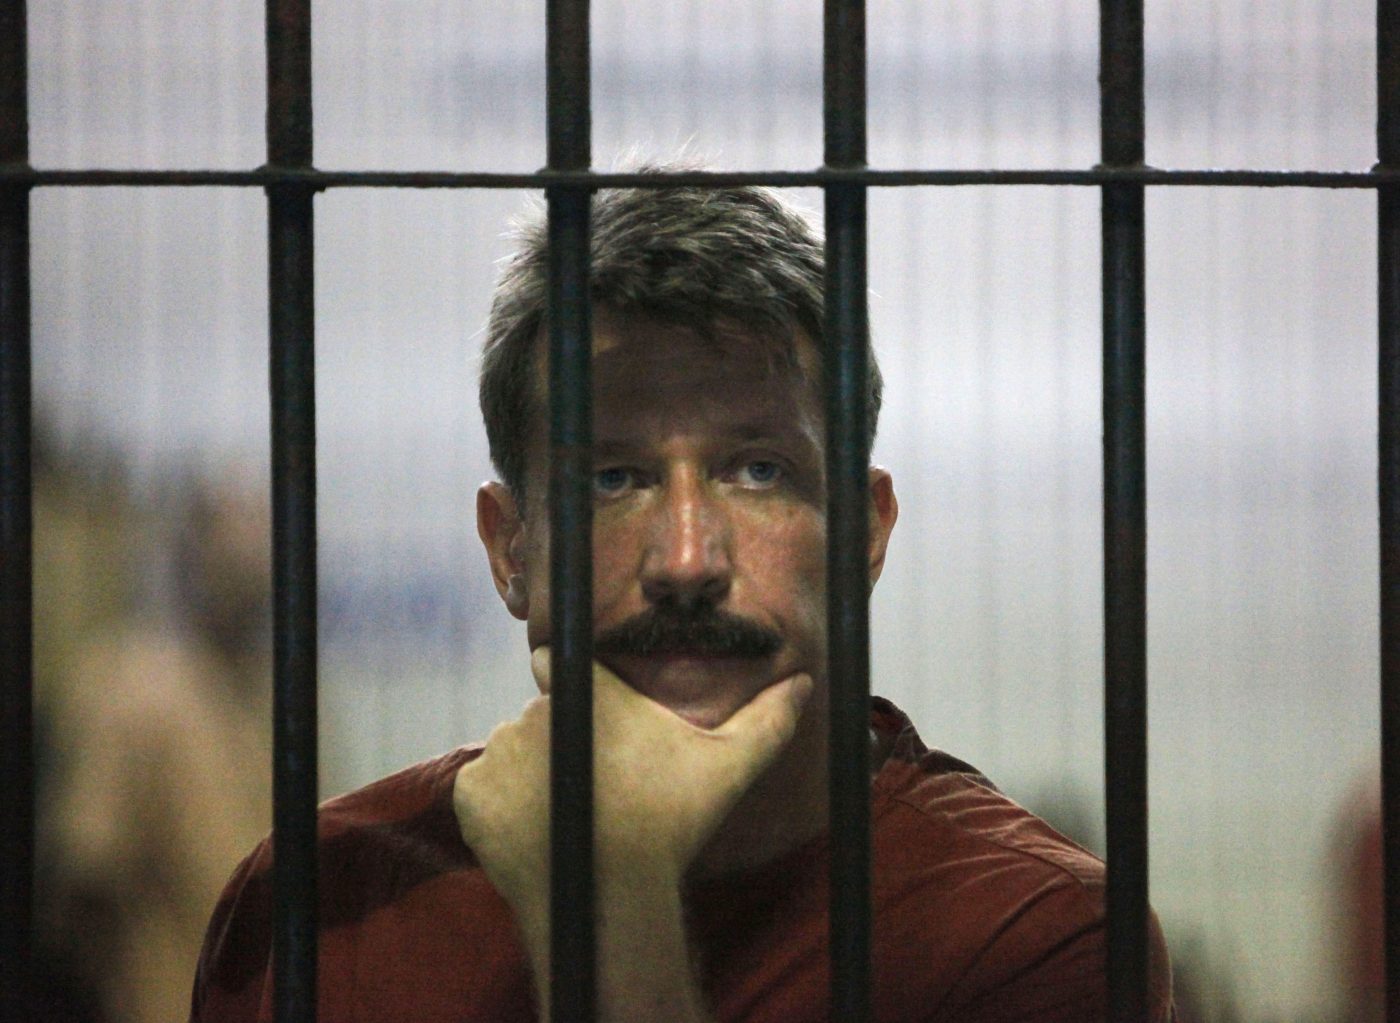 Photo: Suspected Russian arms dealer Viktor Bout waits in a holding cell after arriving for an extradition hearing at the criminal courthouse in Bangkok March 9, 2009. Bout said the United States had no proof linking him to weapons sales to Colombian rebels, as a Thai court adjourned an extradition hearing because his wife was to too ill to testify. Credit: REUTERS/Sukree Sukplang (THAILAND POLITICS CONFLICT SOCIETY)